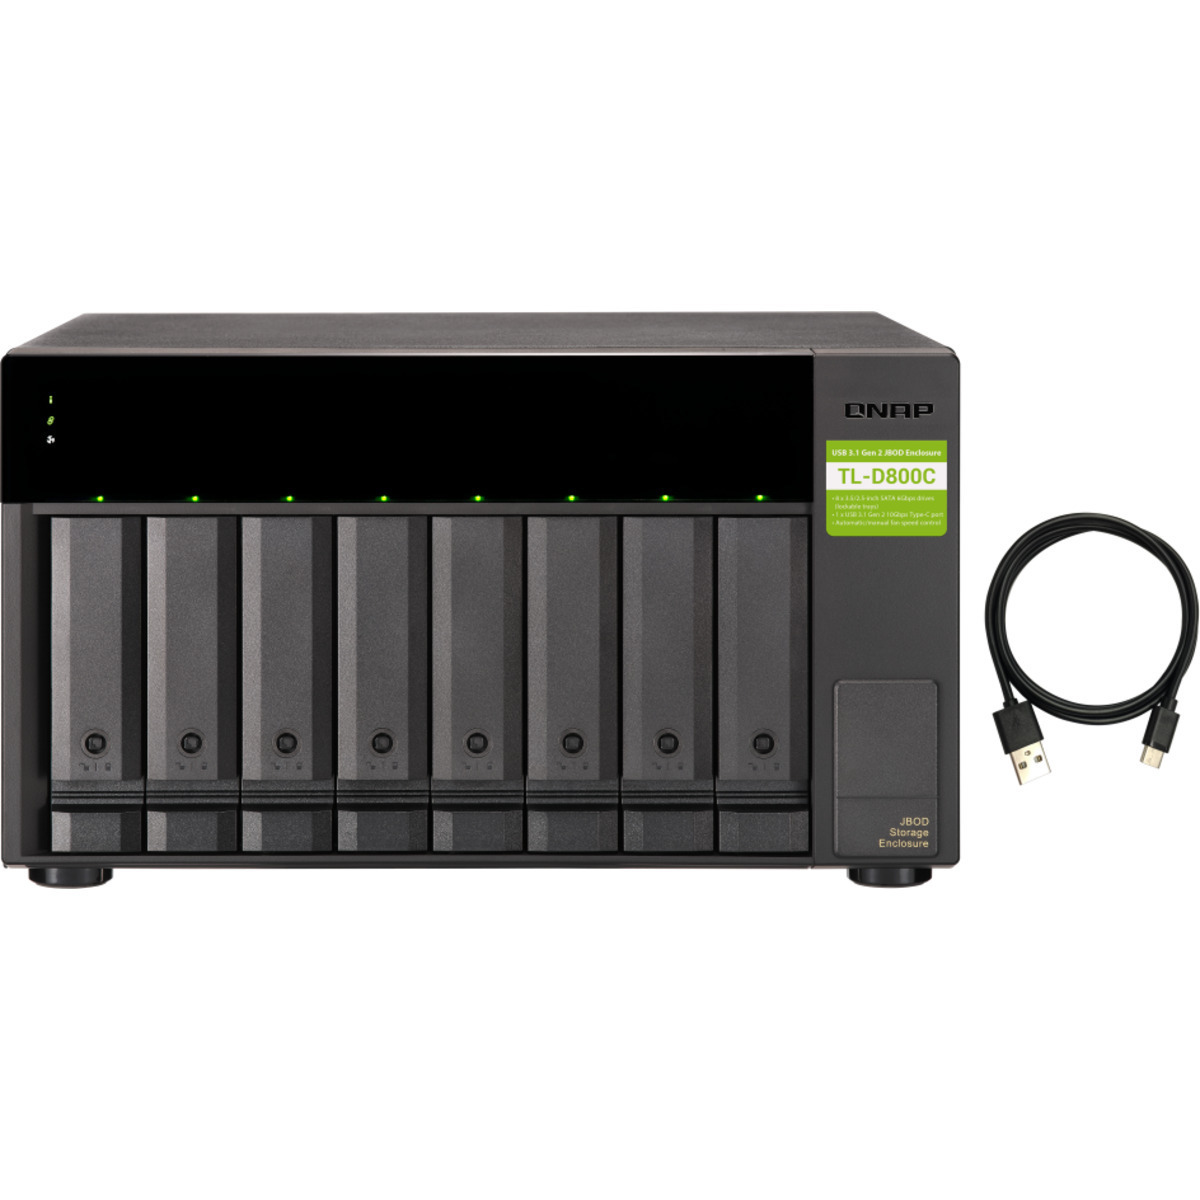 QNAP TL-D800C External Expansion Drive 132tb 8-Bay Desktop Multimedia / Power User / Business Expansion Enclosure 6x22tb Seagate IronWolf Pro ST22000NT001 3.5 7200rpm SATA 6Gb/s HDD NAS Class Drives Installed - Burn-In Tested TL-D800C External Expansion Drive